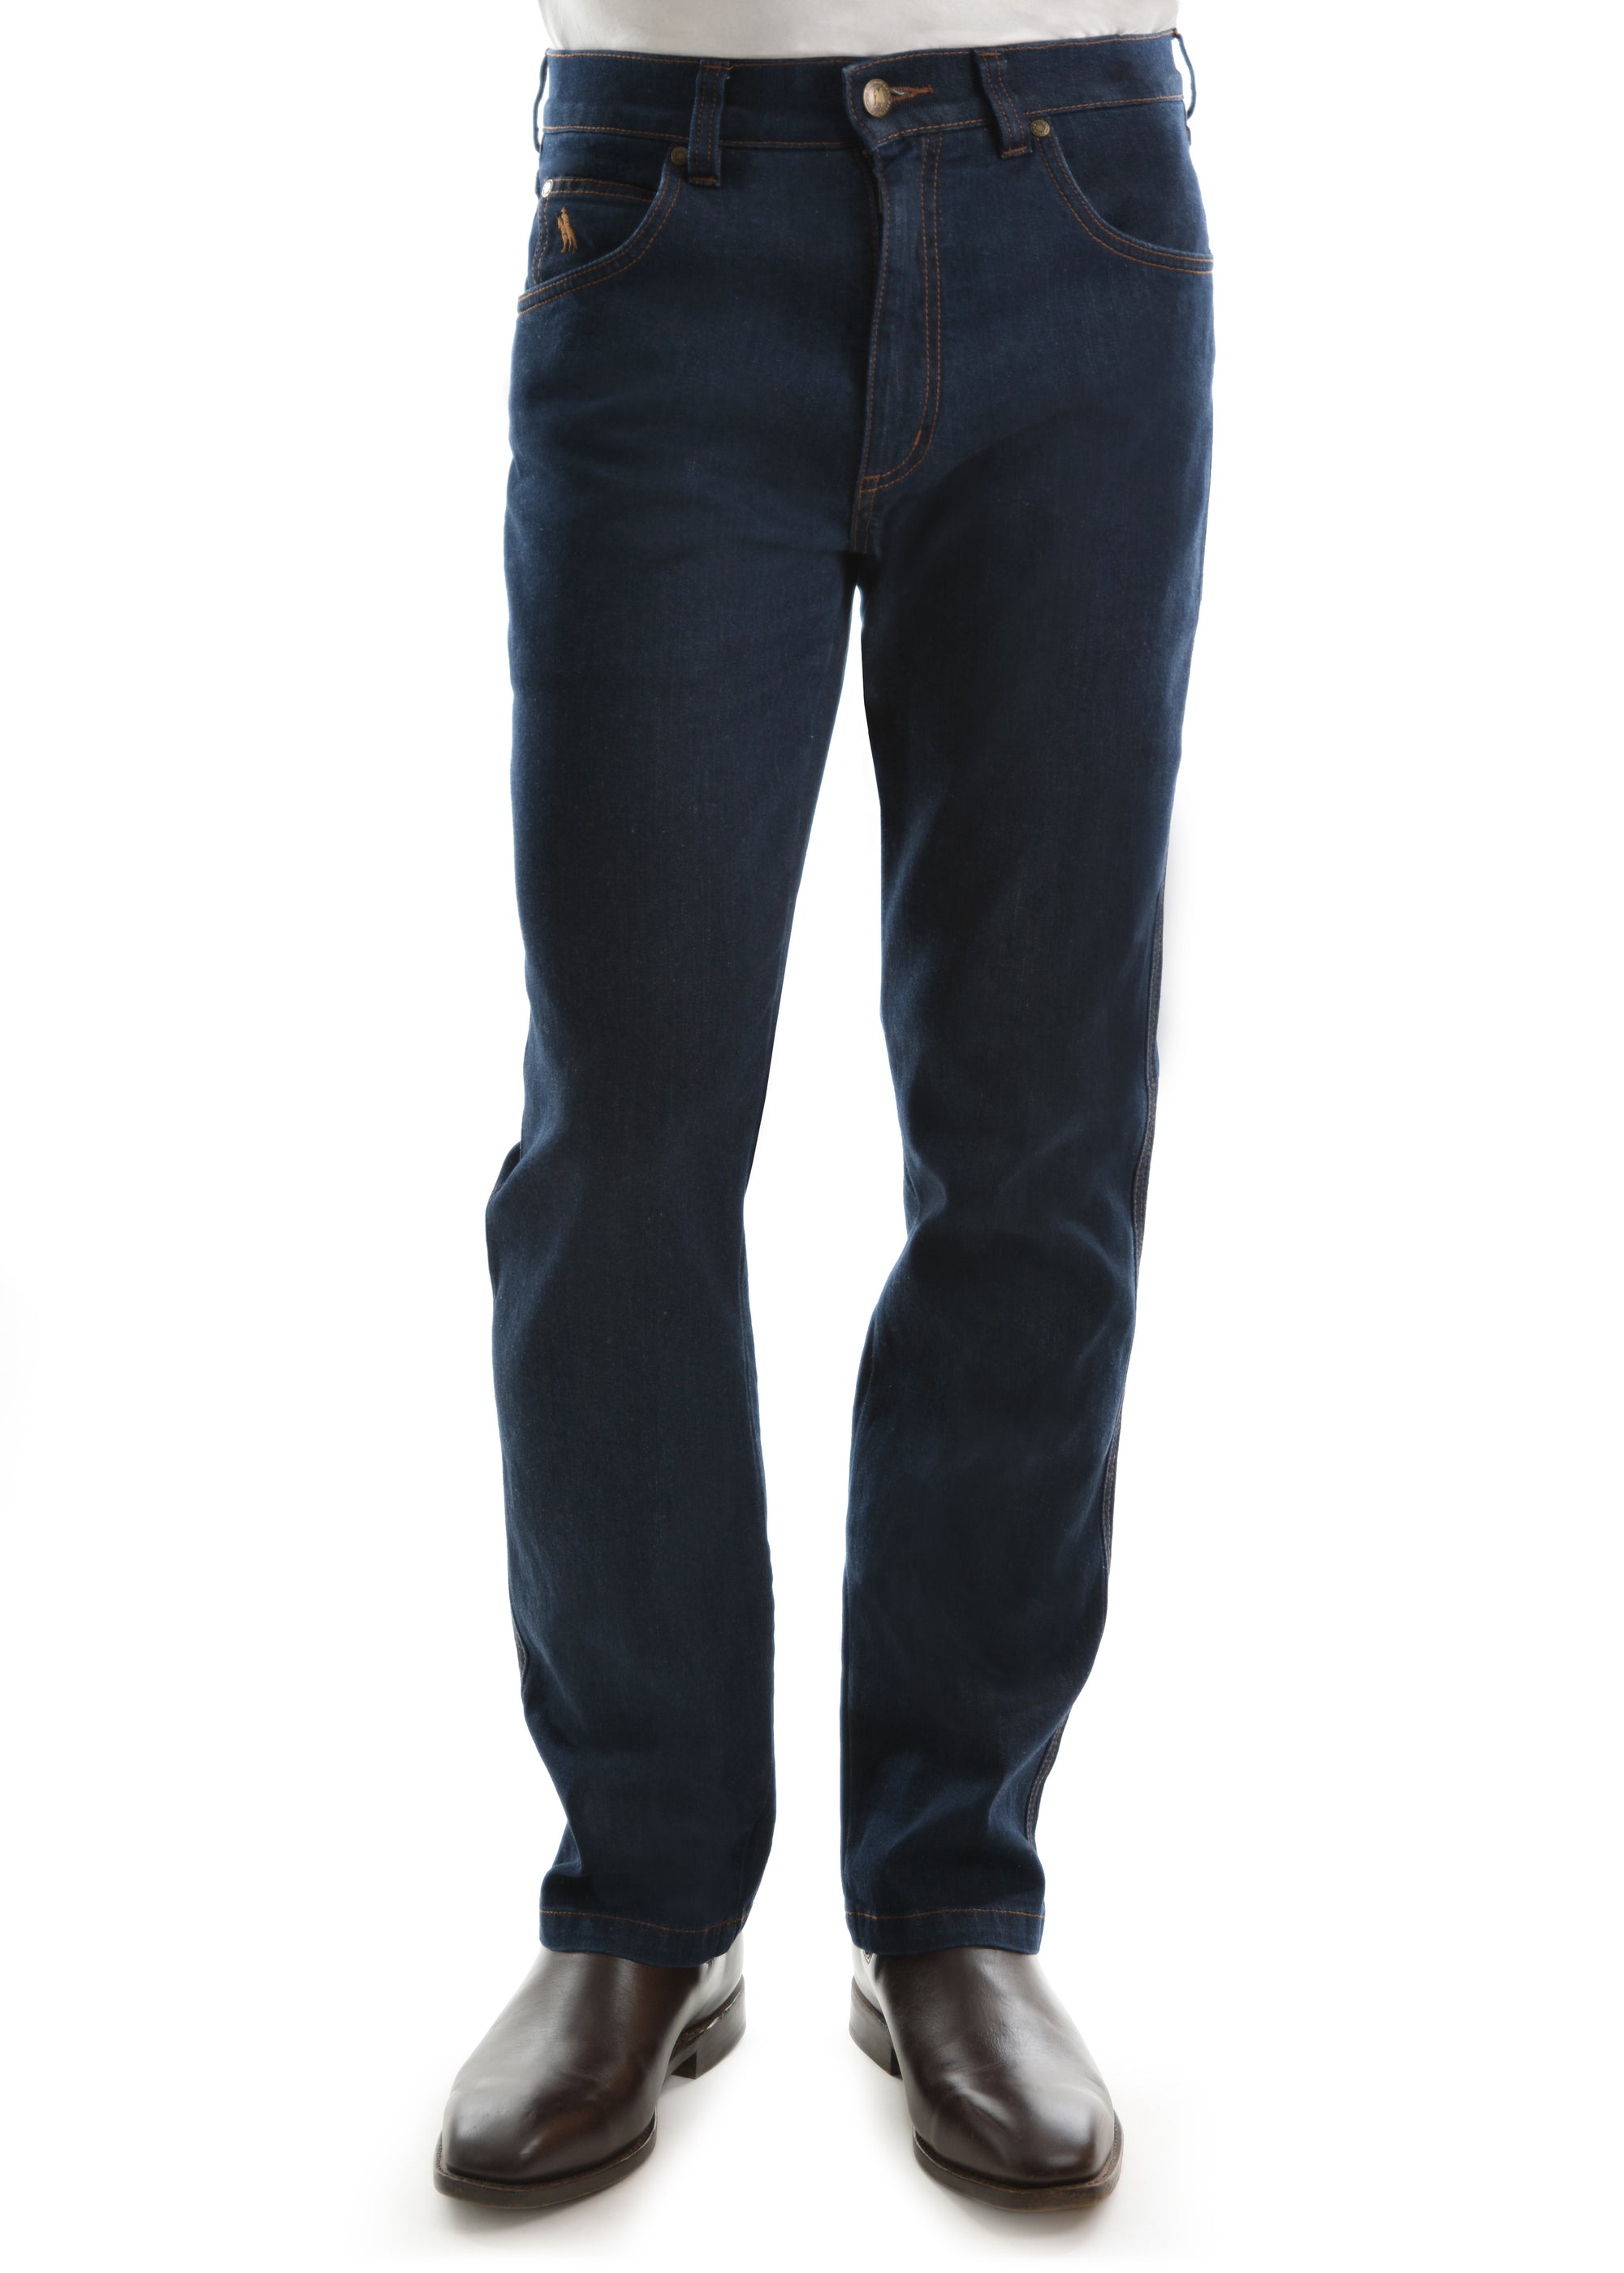 Thomas Cook Tailored Fit Ashley Denim Jean